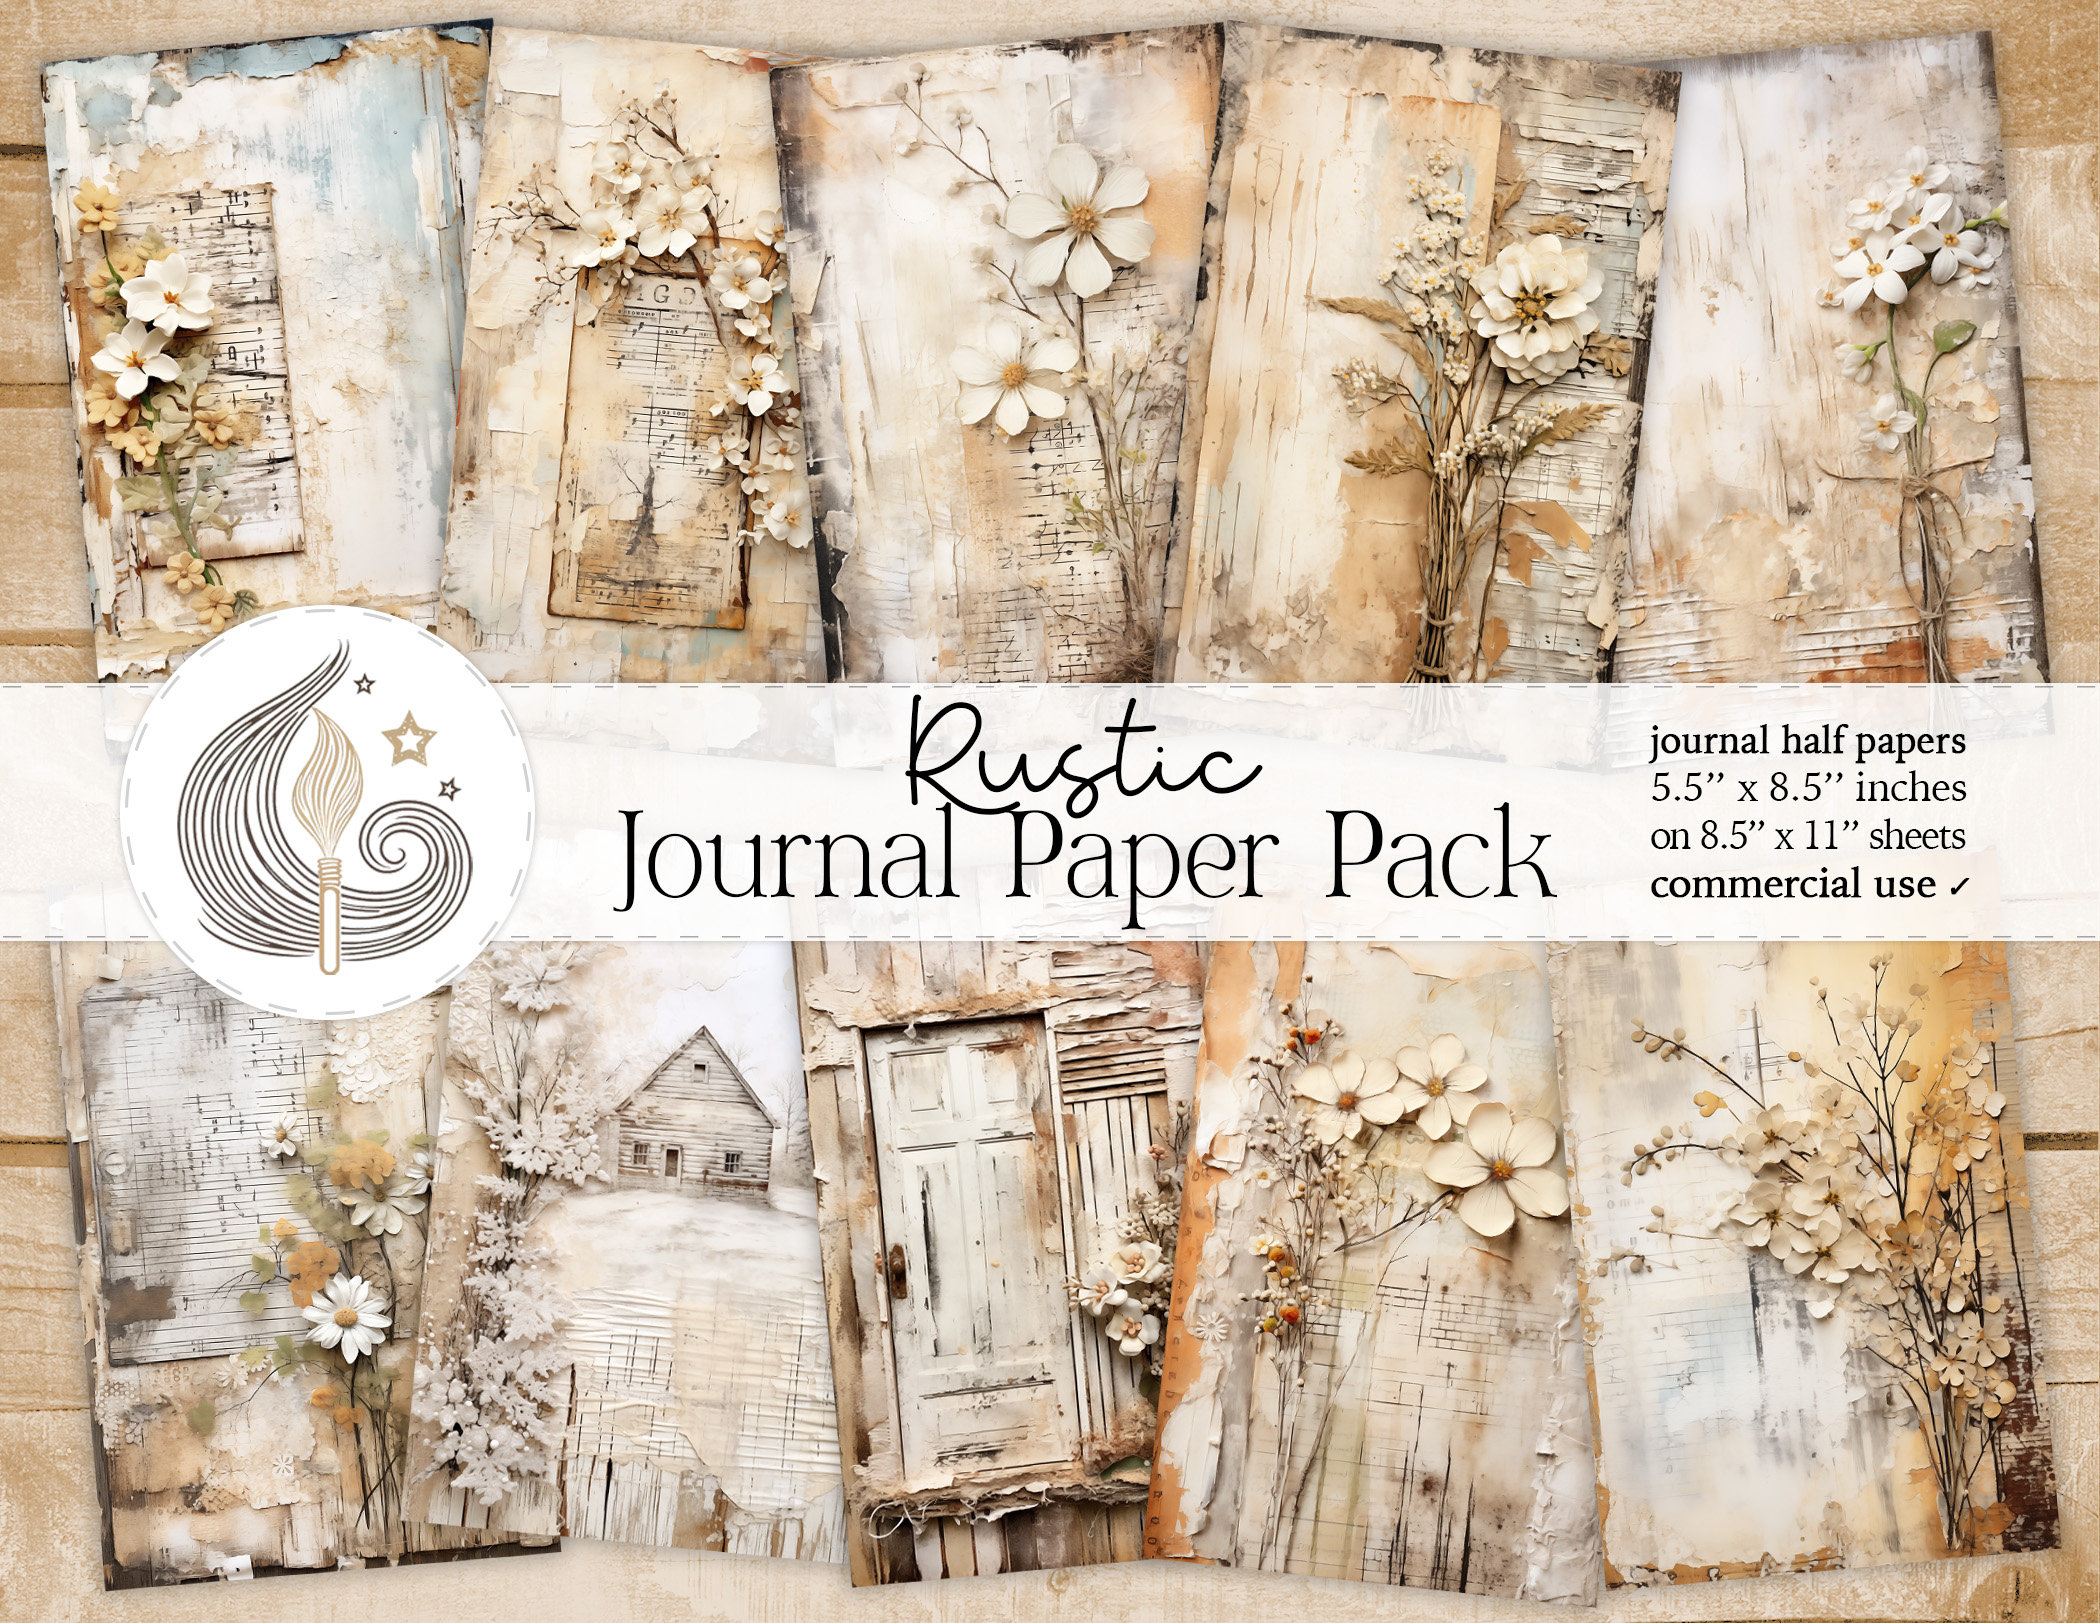 Stencil Paper Transfer Paper for Wood Burning Pyrography or Craft Projects.  Printable Paper 8.5 x 11 Size No Carbon Paper Needed Print Directly